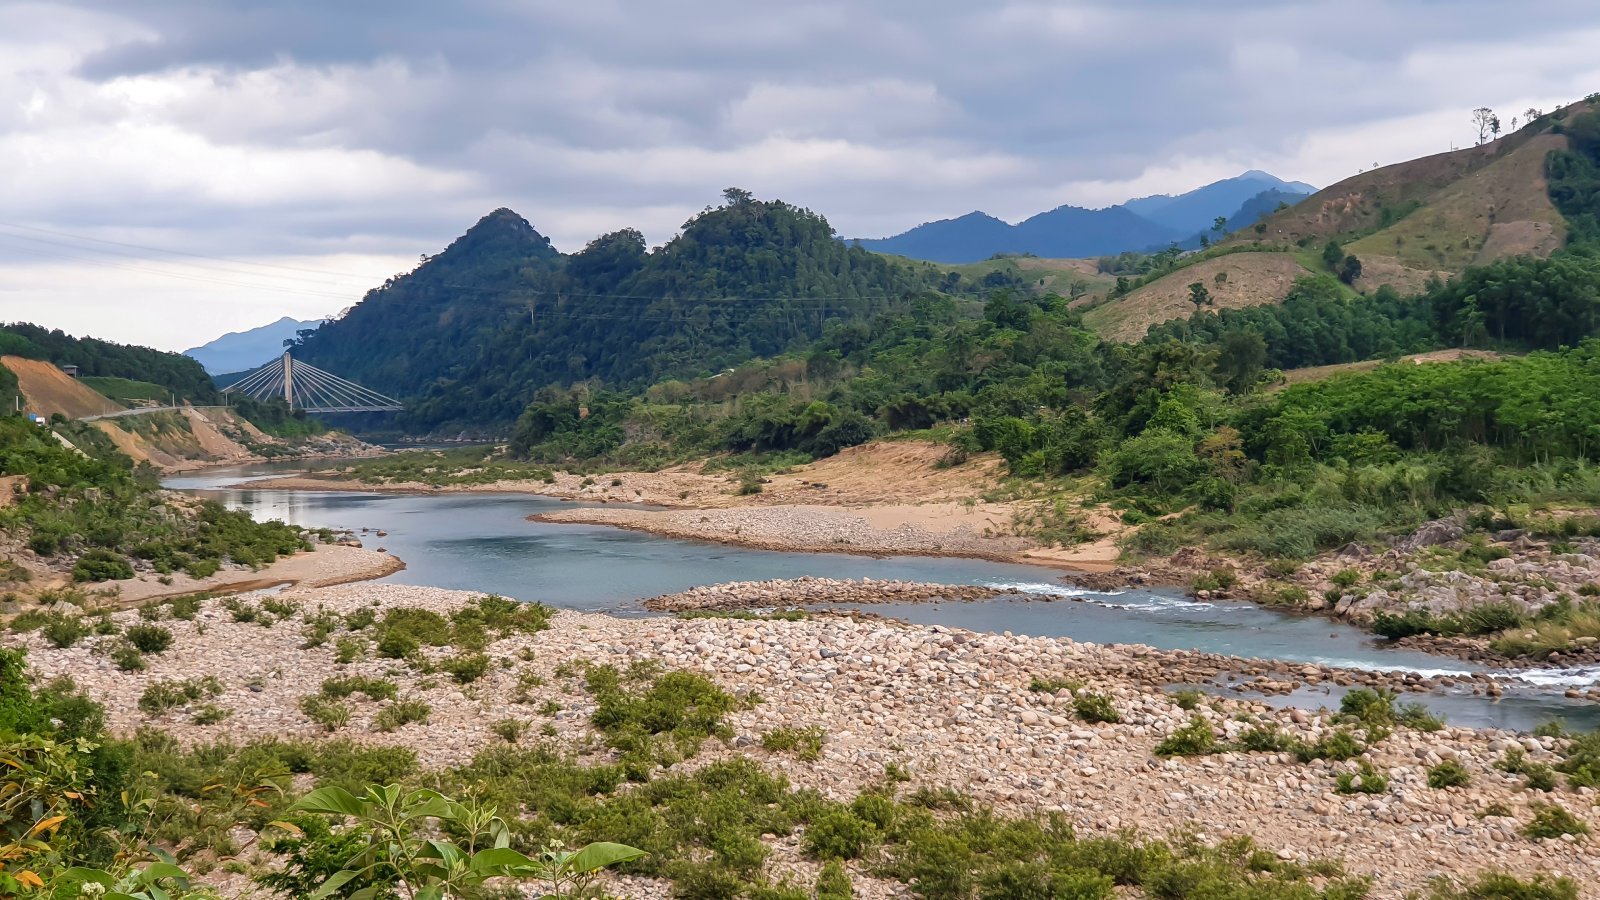 <p class="wp-caption-text">Image Credit: Shutterstock / Duc Huy Nguyen</p>  <p><span>The site of one of the longest and most controversial battles of the Vietnam War, Khe Sanh, offers a poignant backdrop for trekking tours led by veterans. The area, now peaceful and slowly returning to nature, still bears scars of the conflict, with bomb craters and remnants of fortifications dotting the landscape. Veterans share personal accounts of the siege, the tactical decisions made, and the psychological impact of the battle, providing a deeply human perspective on the events that unfolded. The surrounding countryside, with its coffee plantations and ethnic minority villages, also offers insights into this historically significant region’s current way of life.</span></p>